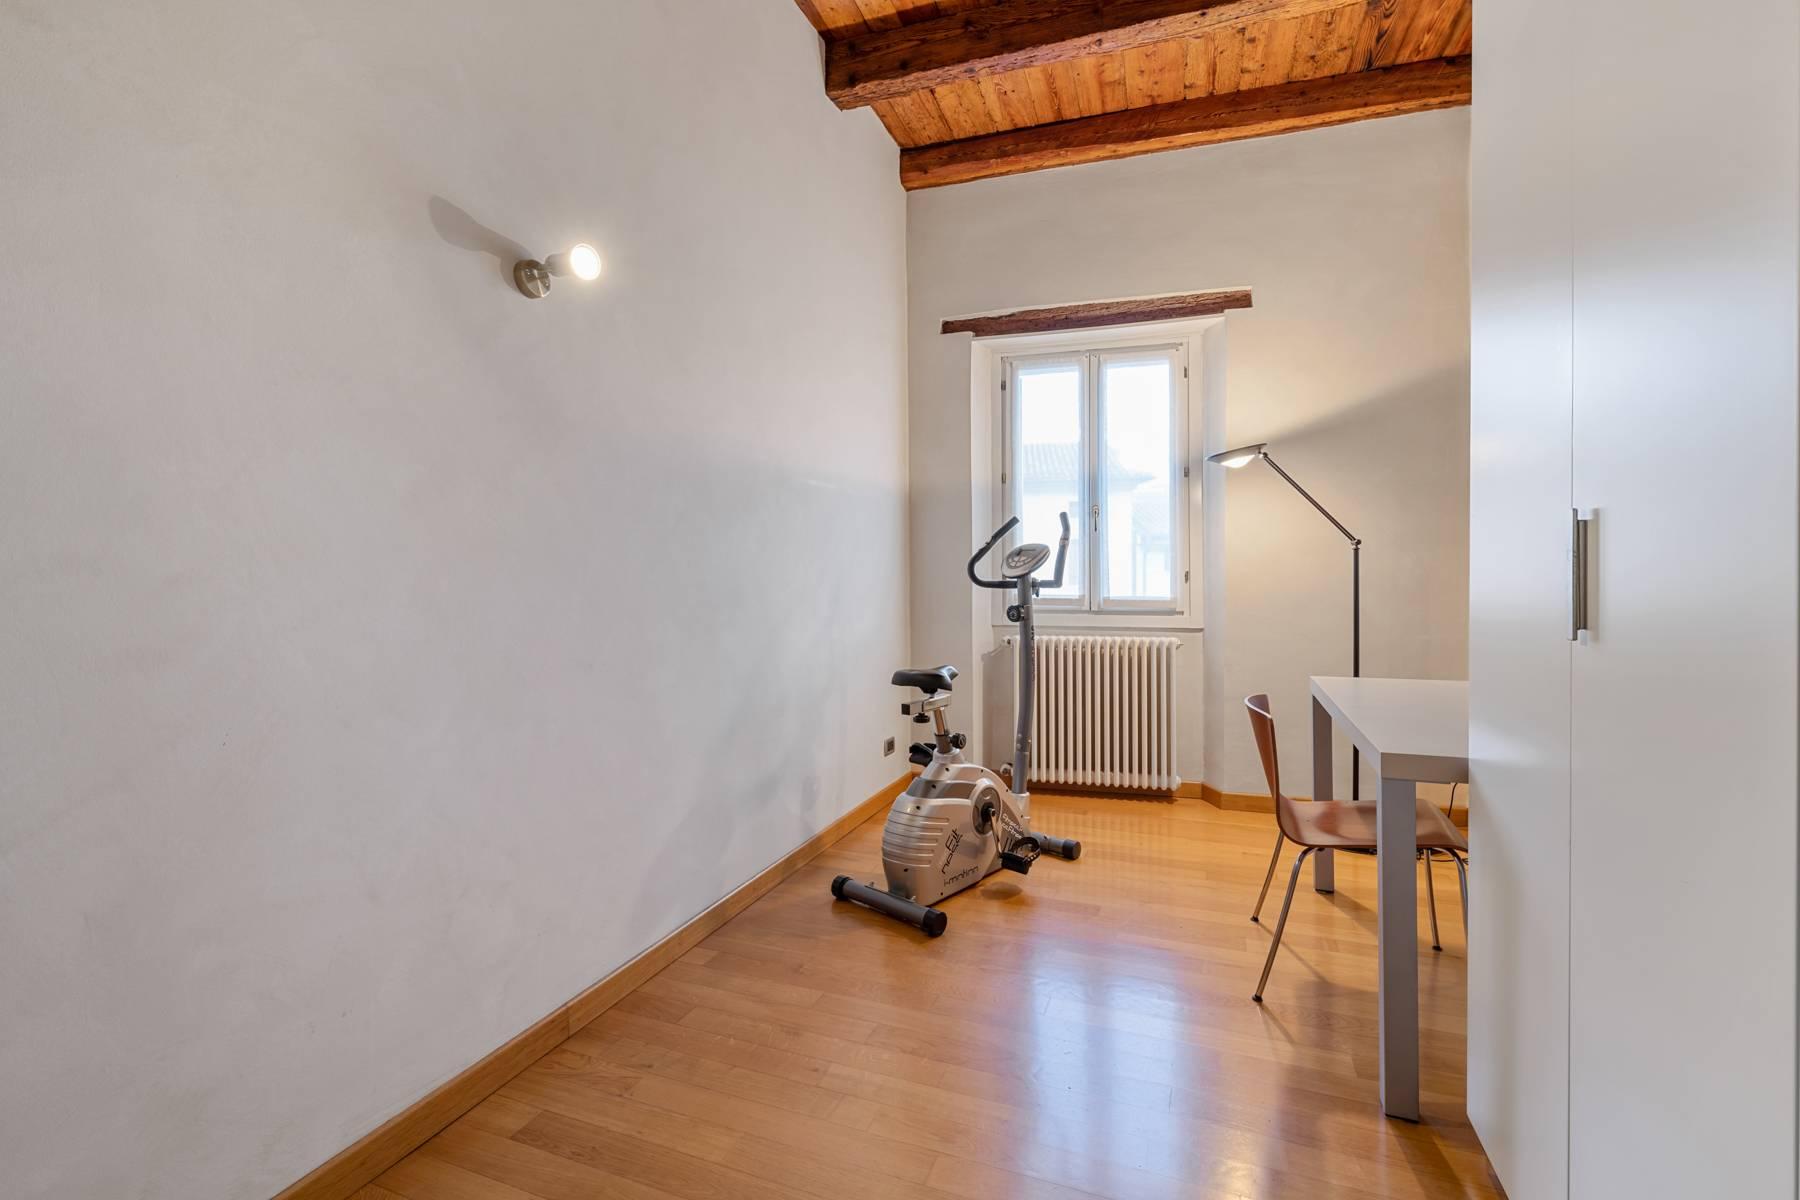 Elegant 15th century building, completely renovated in the historic center of Serravalle - 15